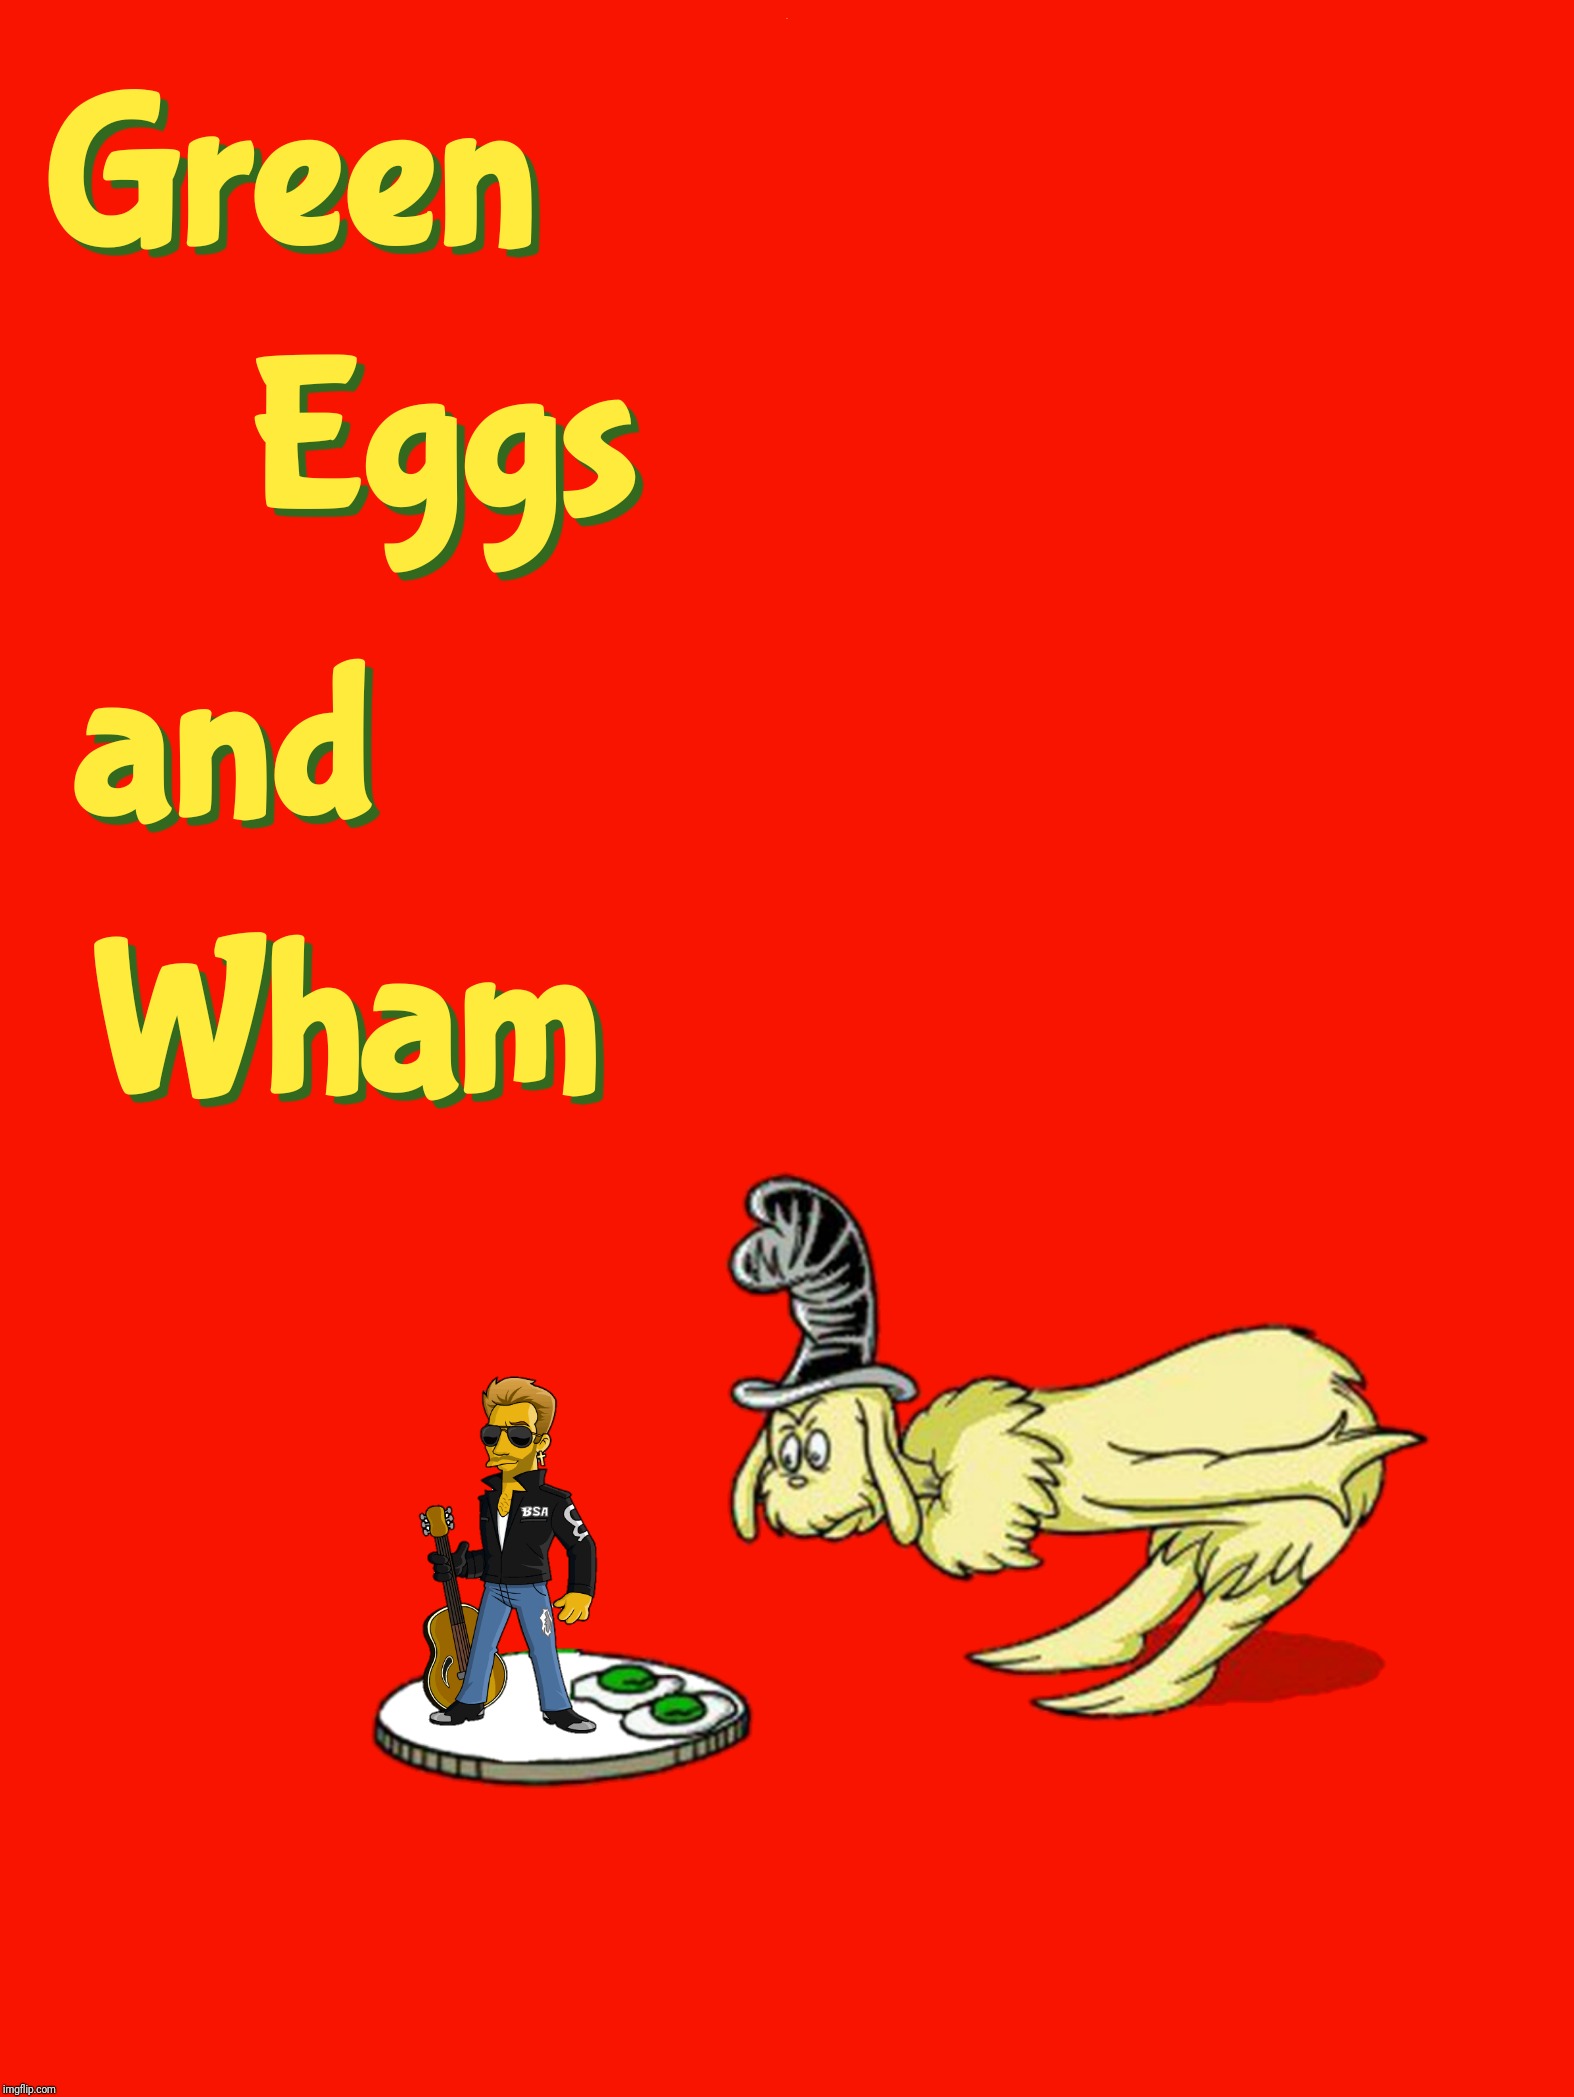 Bad Photoshop Sunday presents:  Wham I Am |  D | image tagged in bad photoshop sunday,green eggs and ham,george michael,wham | made w/ Imgflip meme maker